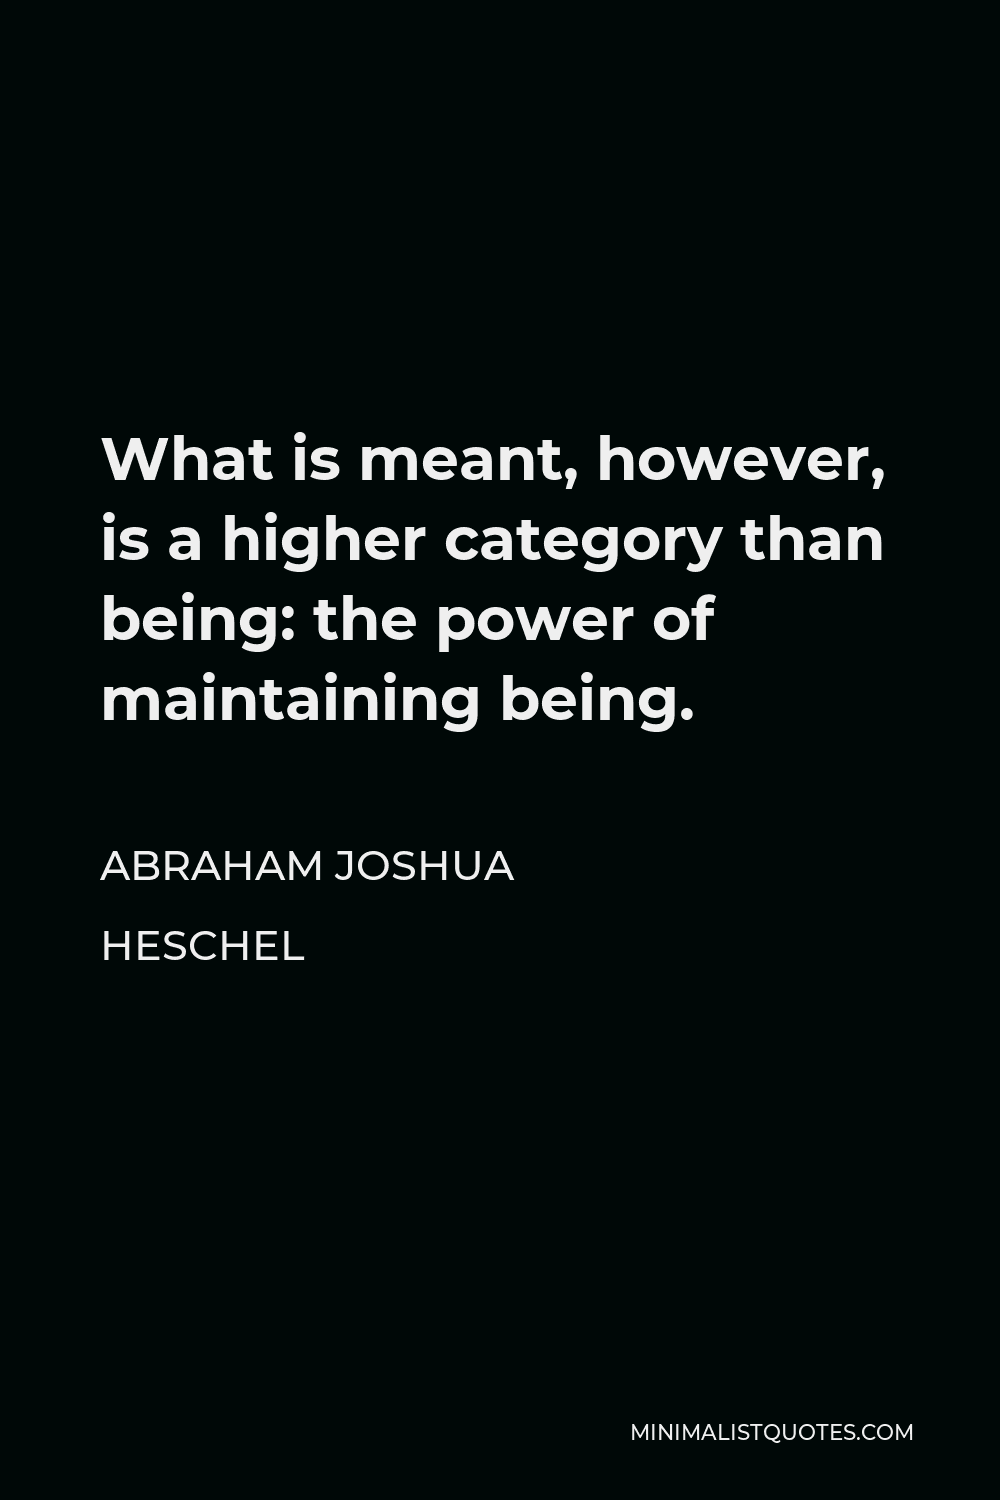 Abraham Joshua Heschel Quote - What is meant, however, is a higher category than being: the power of maintaining being.